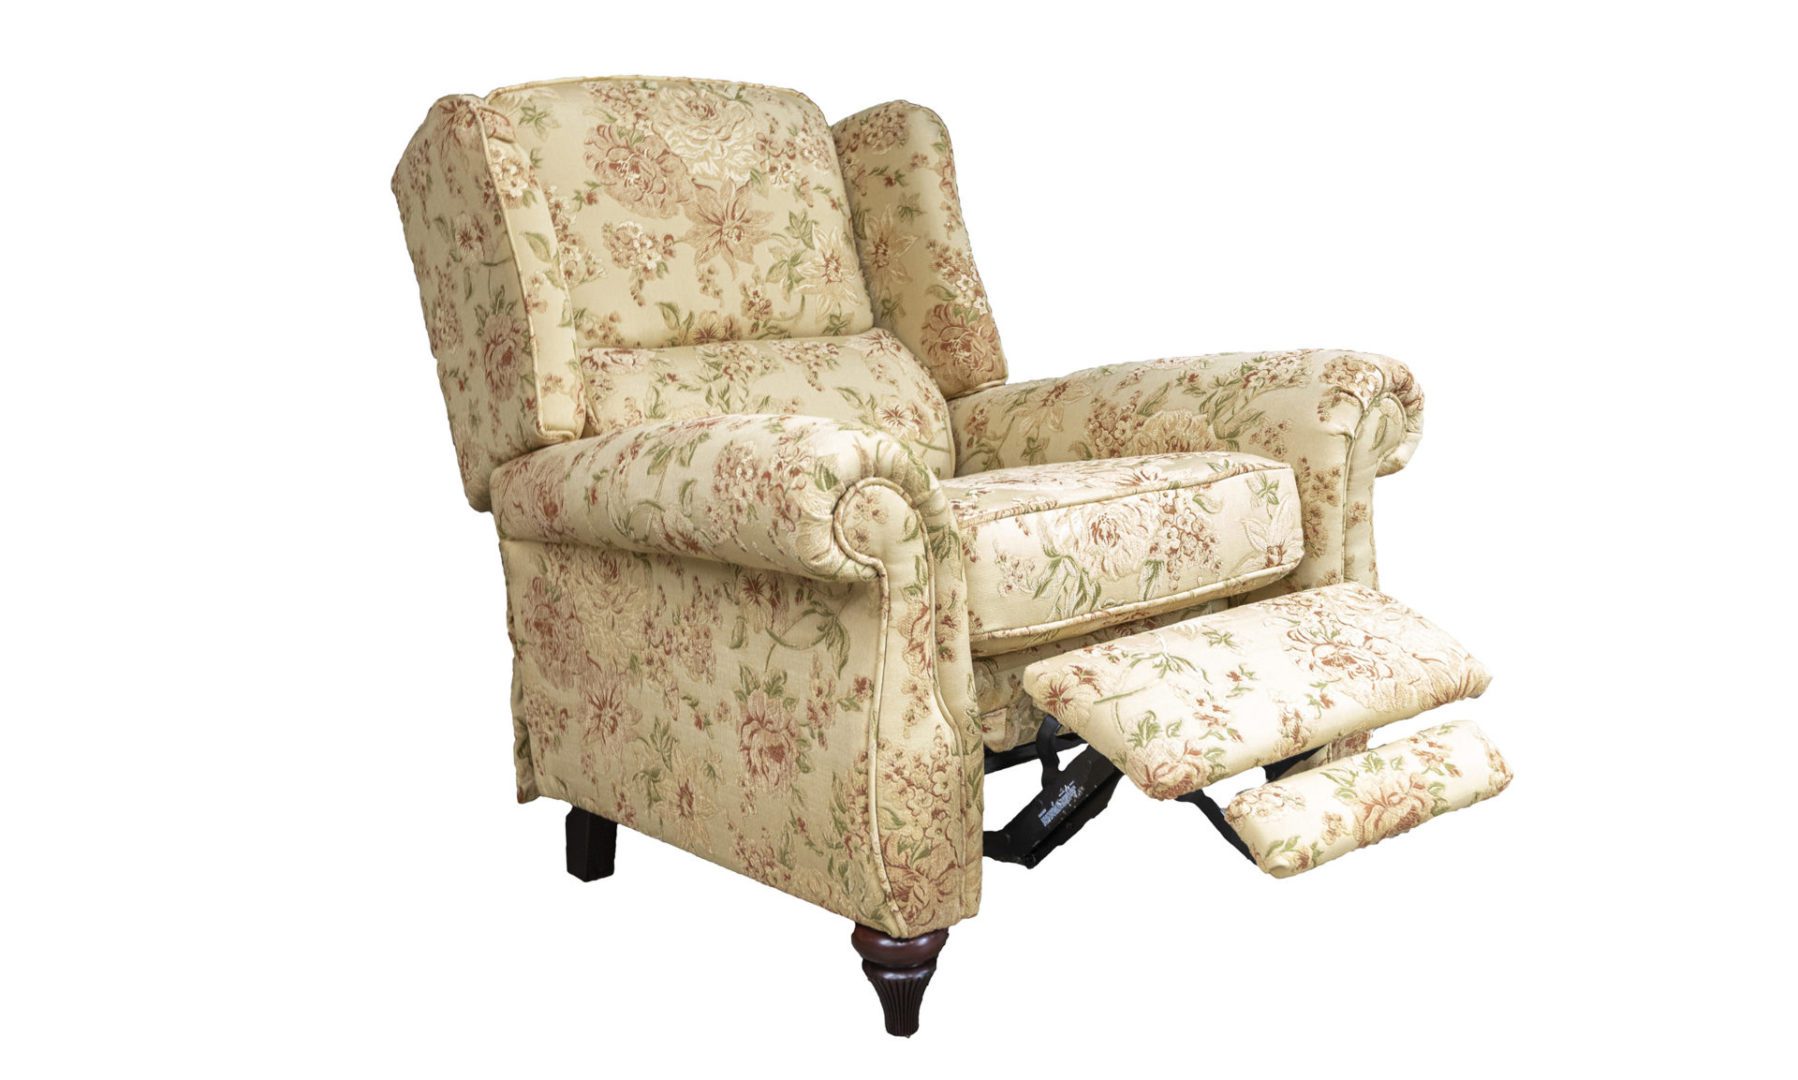 Greville Recliner Chair in Semi Ramis Pattern, Platinum Collection Fabric